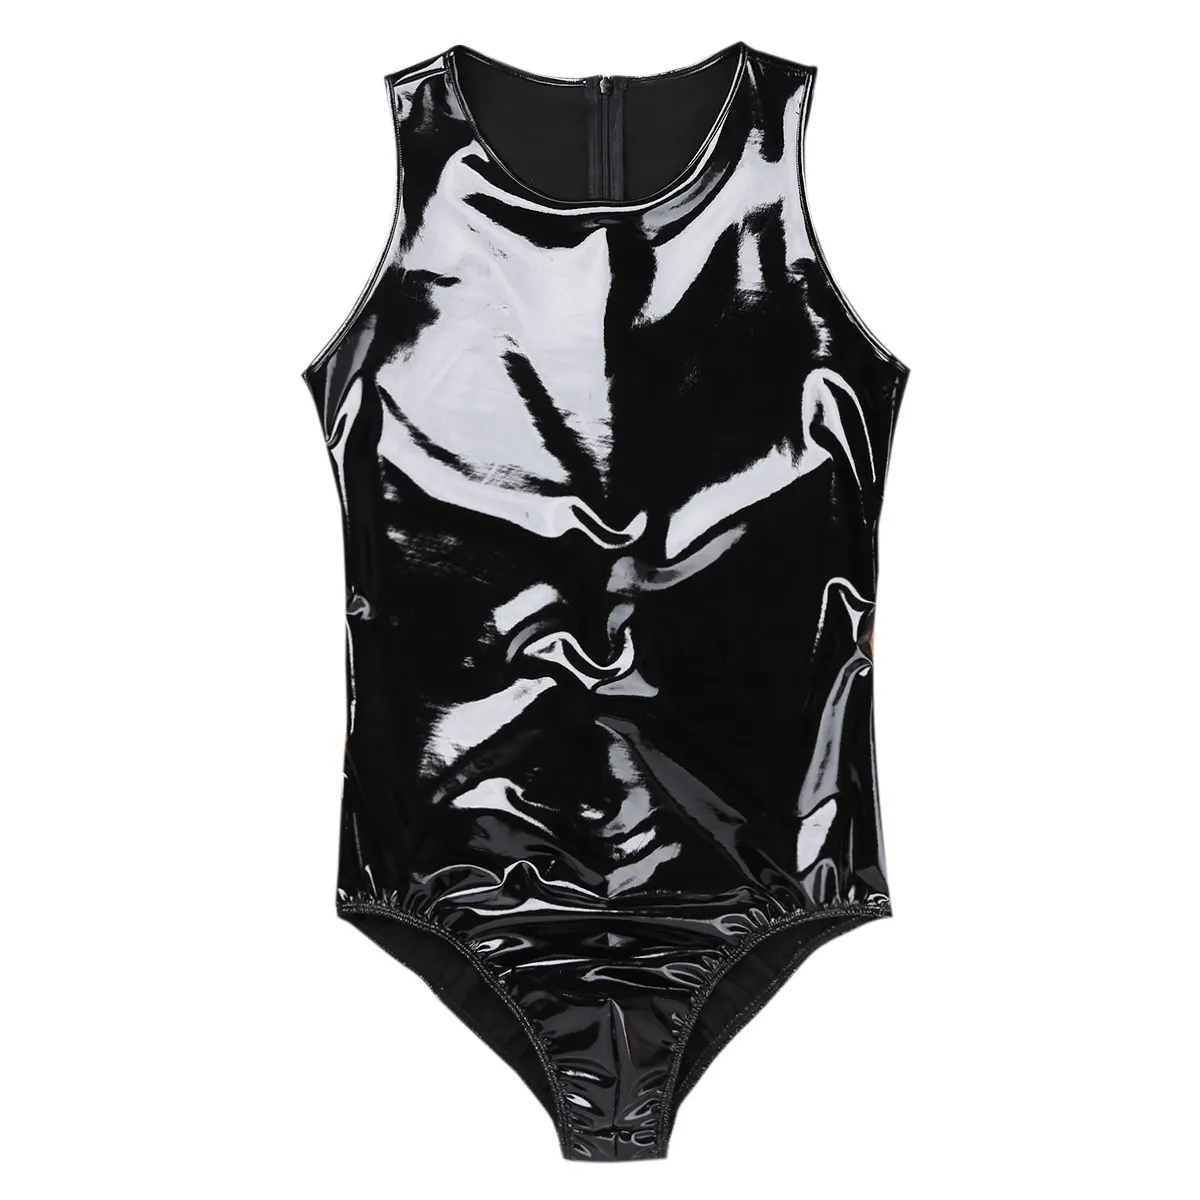 Latex Catsuit Men Babydoll Body Lingerie Wetlook PVC Leather Thong Bodysuit Zipper Back Overall Jumpsuit Homme Sexy Clubwear L5450184